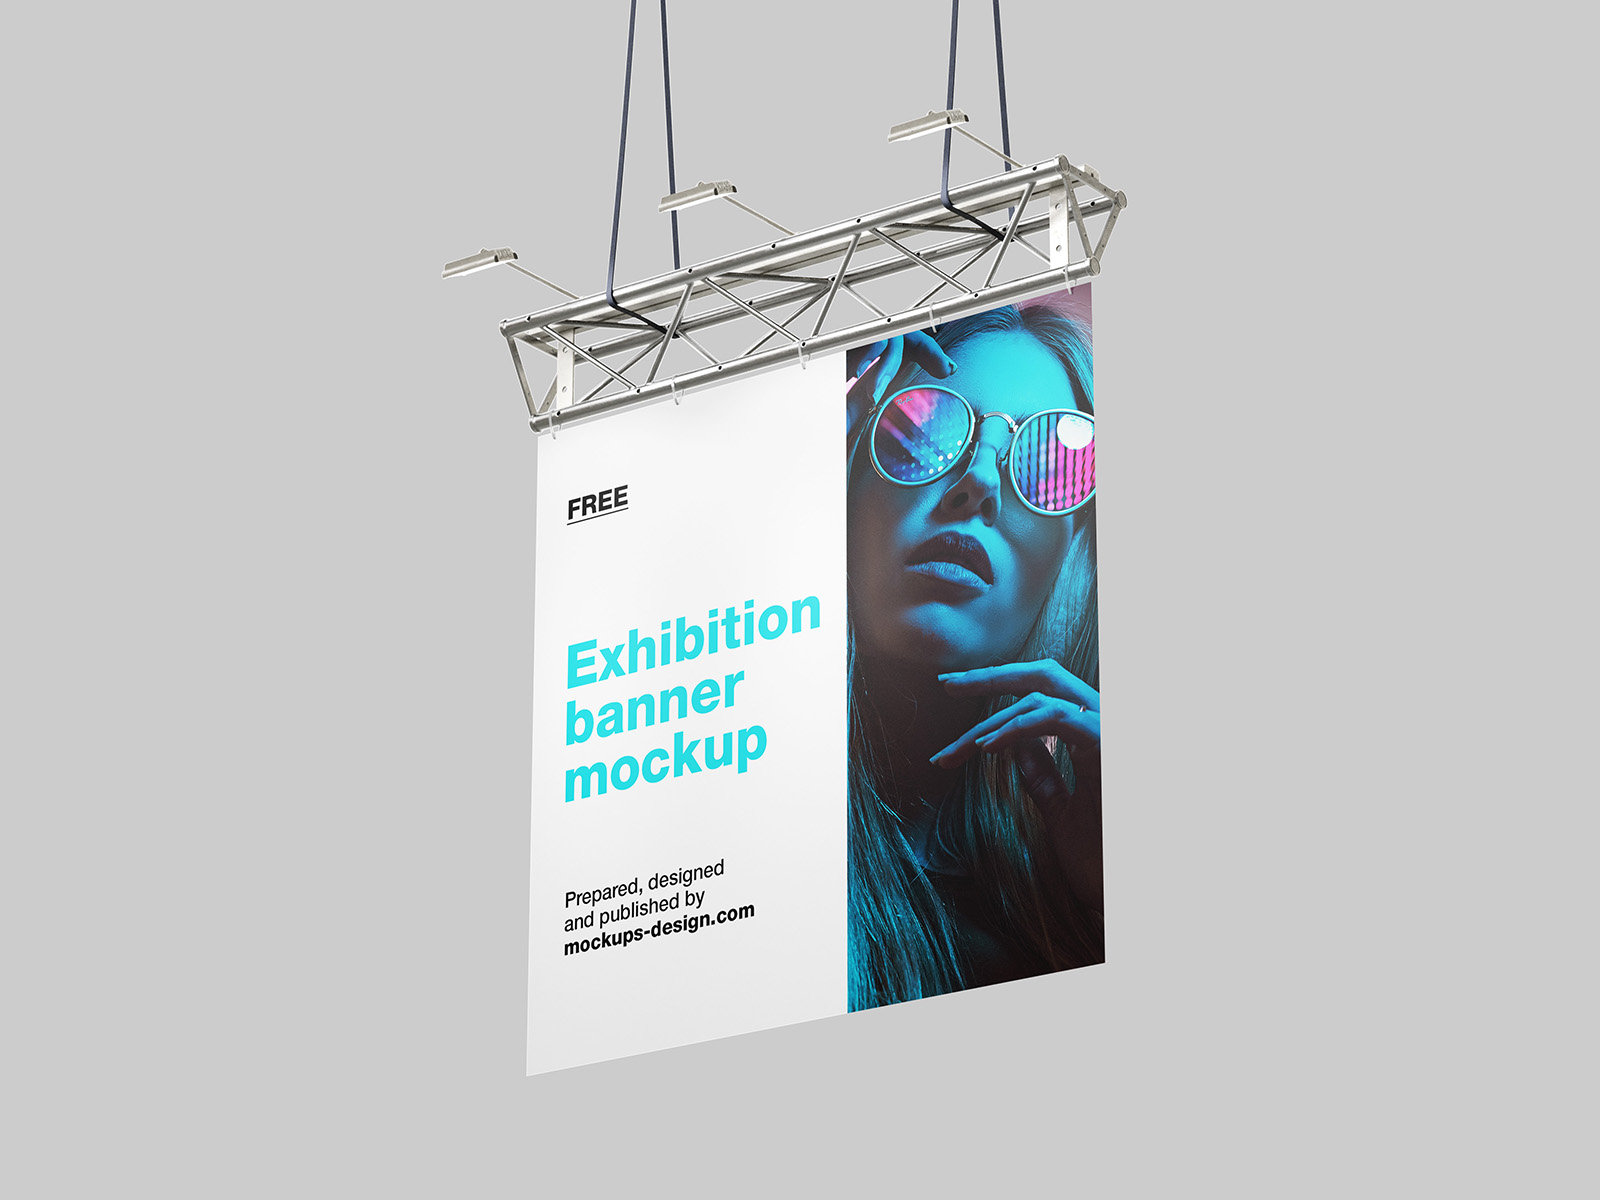 3 Hanging Exhibition Banner Mockups in Perspective Sights FREE PSD